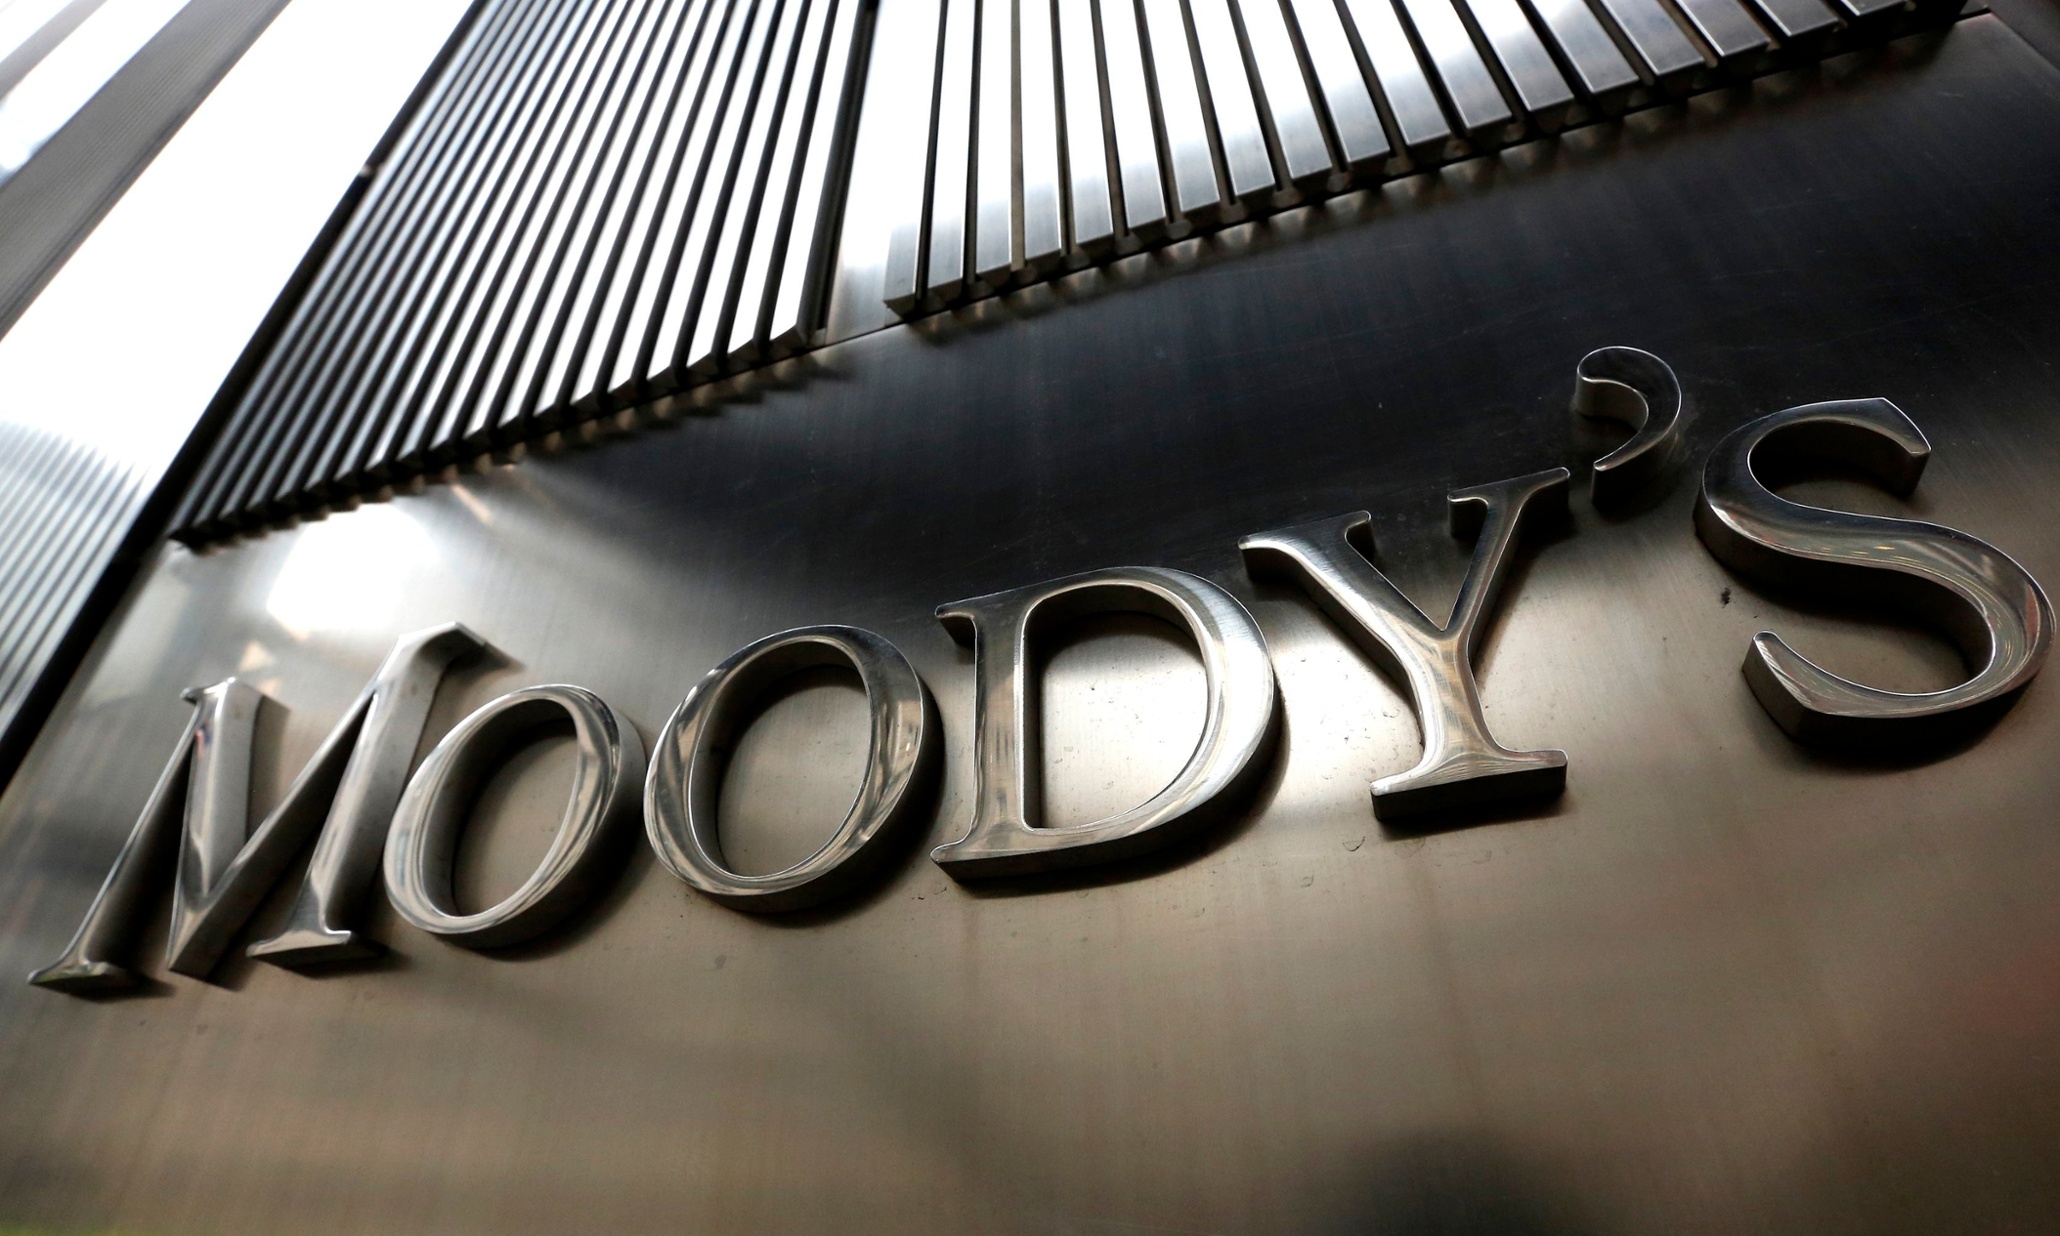 Moody's Upgrades Hungary to BAA2, Outlook Stable